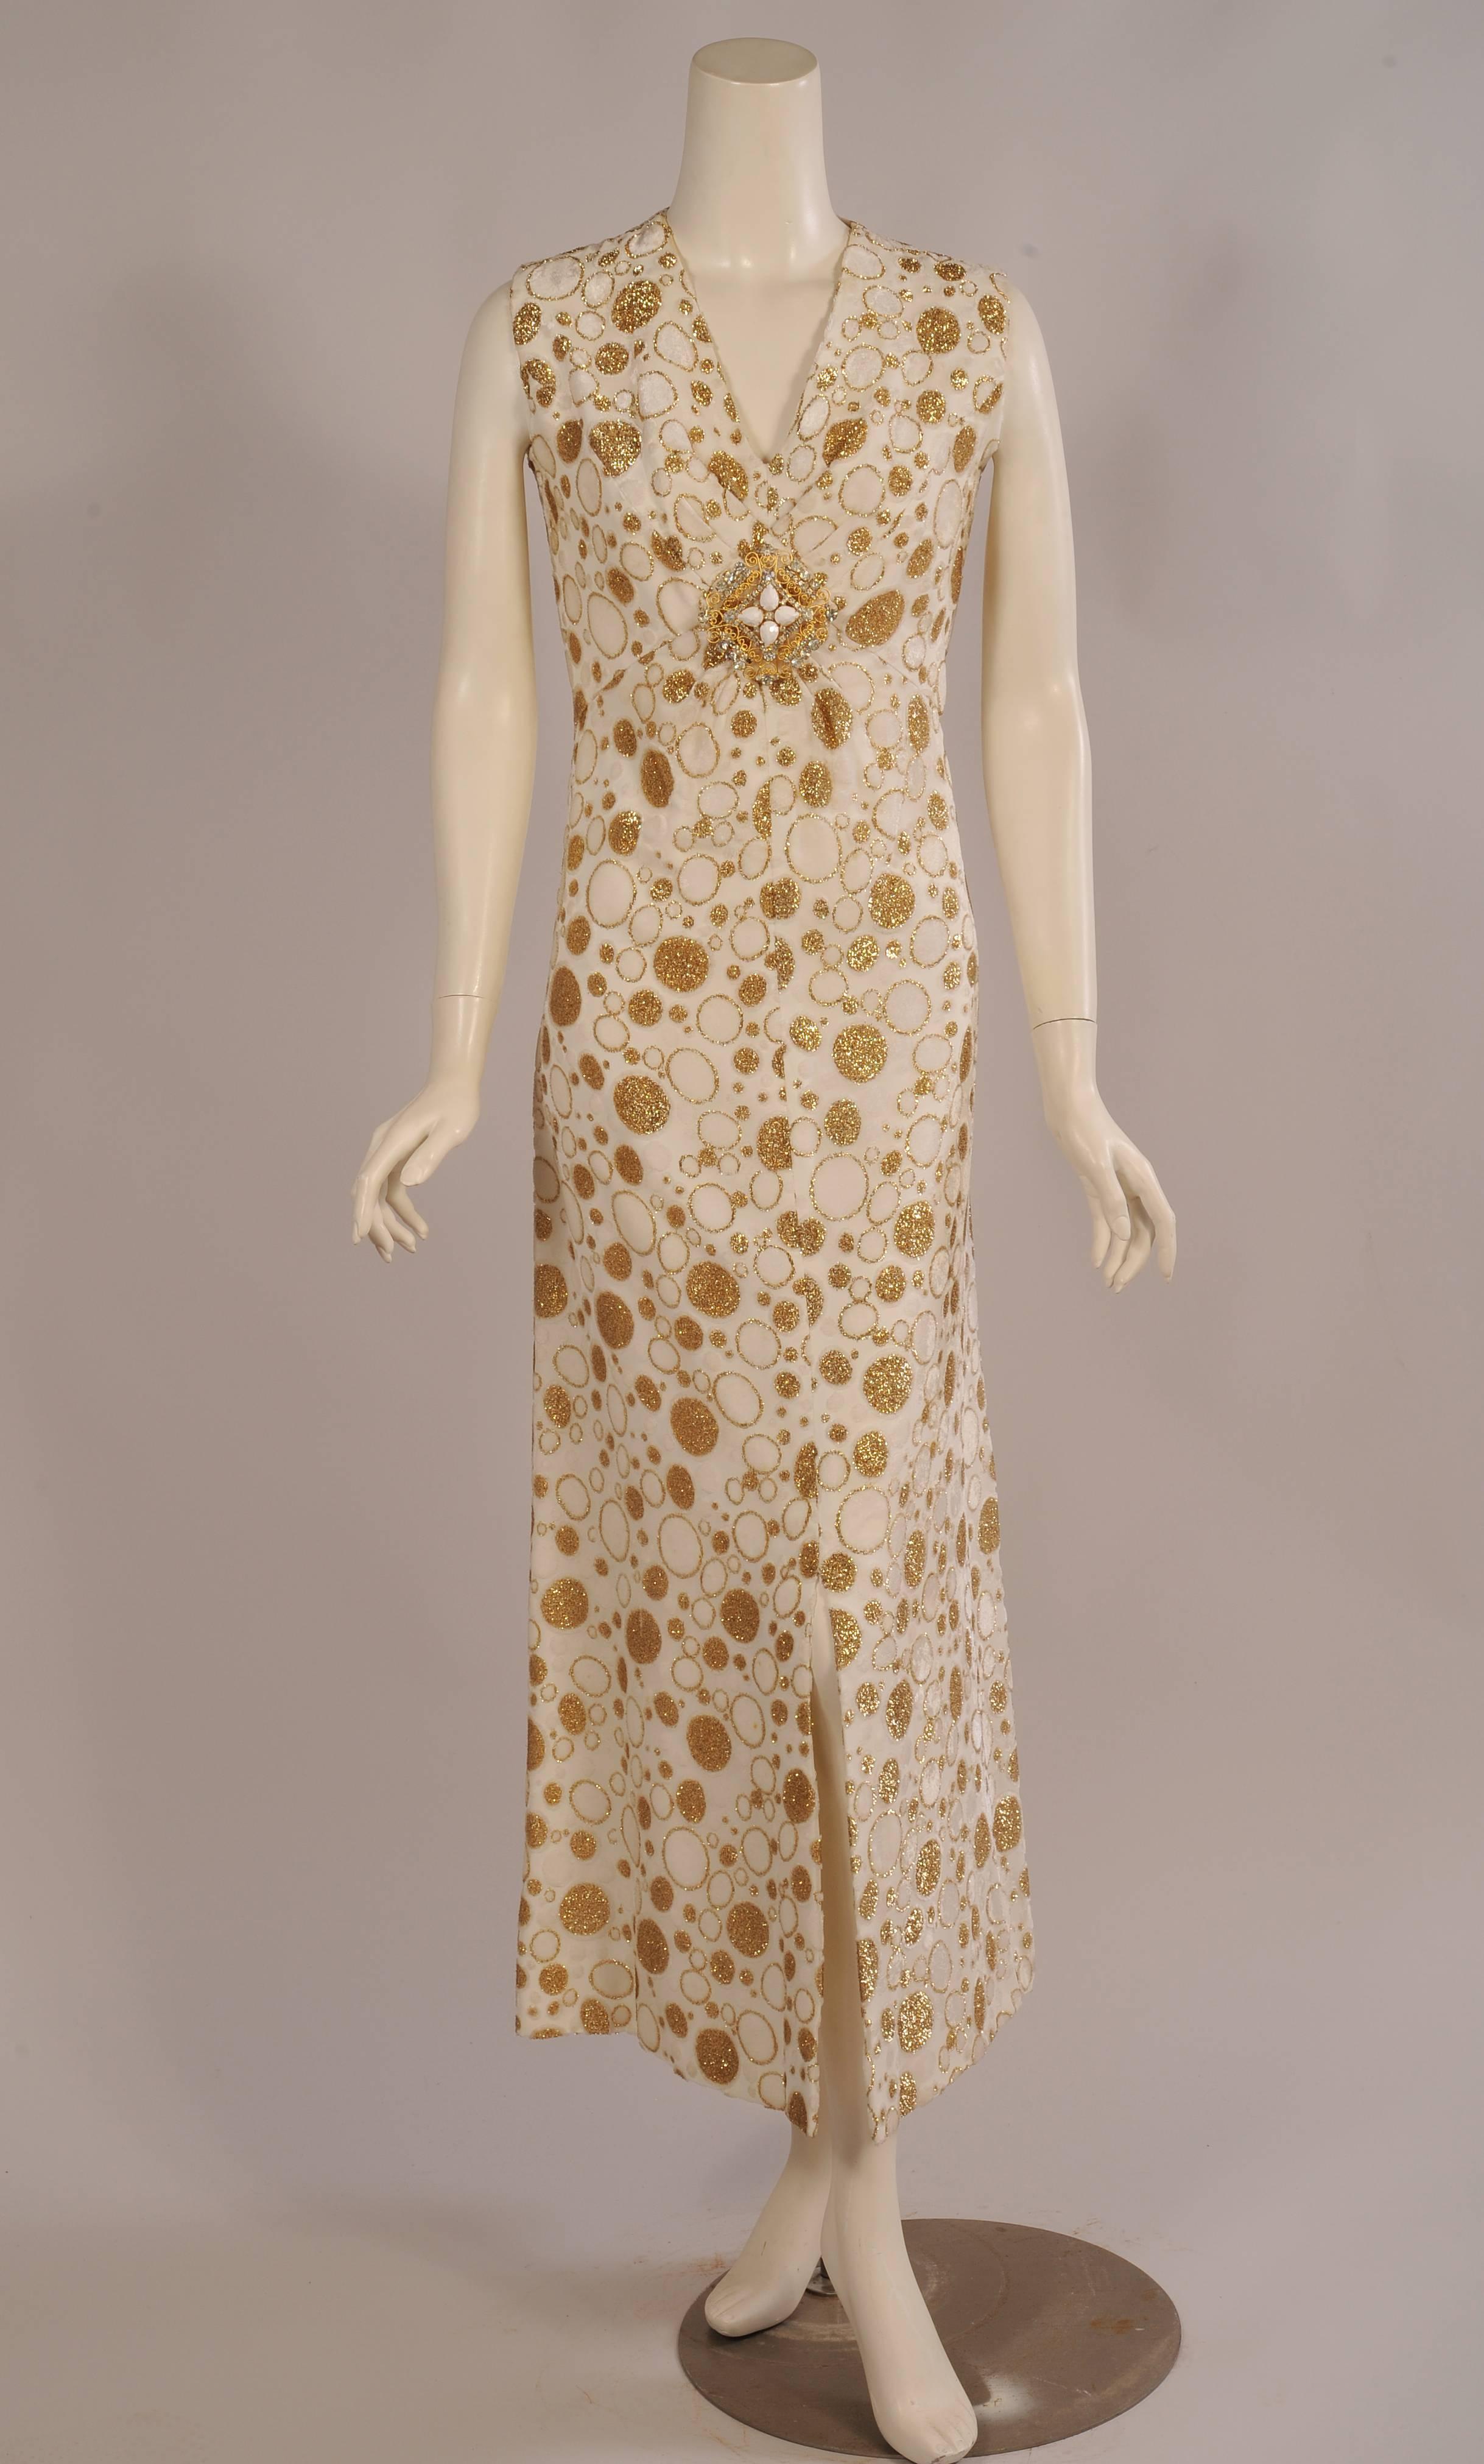 What a glamorous cut velvet and lurex on chiffon dress with polka dots in many sizes. The white ones are cut velvet, some edged with gold lurex thread that is used for the velvet edged gold dots. The sleeveless dress has a V shaped neckline with a